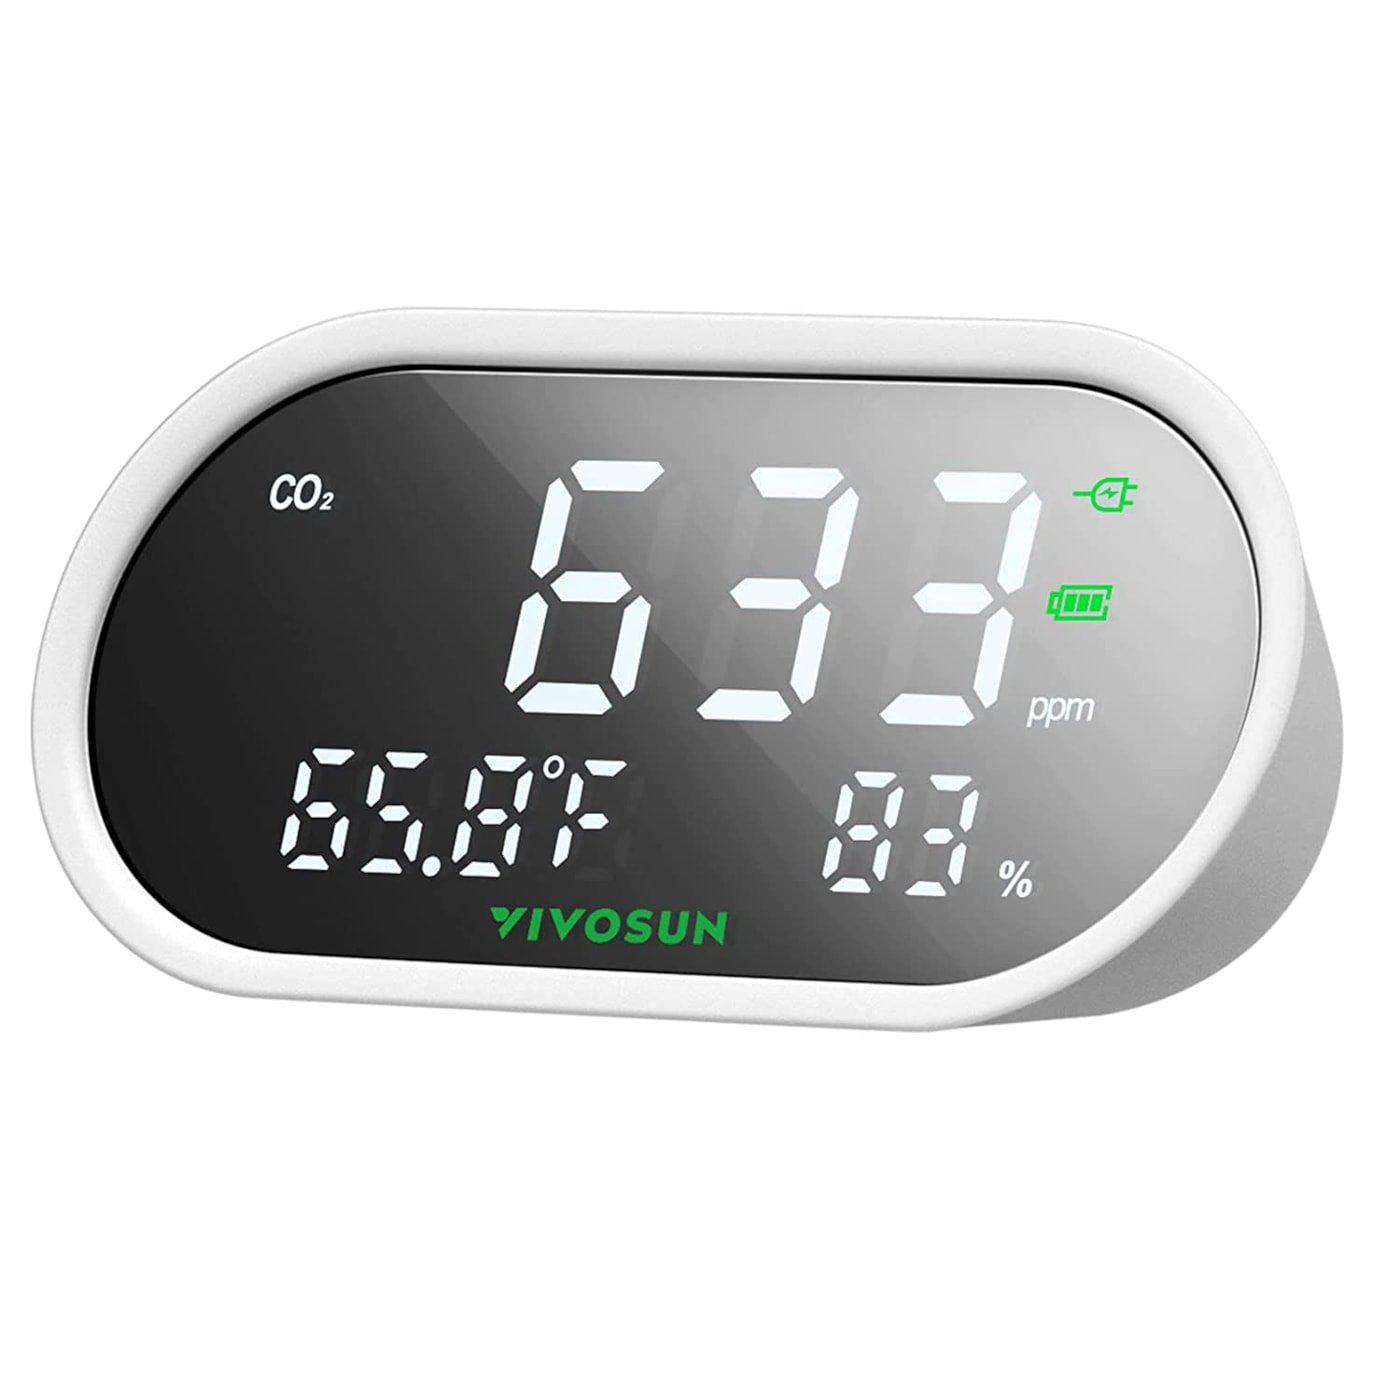 VIVOSUN 4-in-1 Air Quality Monitor, Accurate CO2 Meter, Carbon Dioxide Detector with NDIR Sensor, 400-5000PPM CO2 / Temperature (℉) / Indoor Humidity Tester with CO2 Alarm Function Included